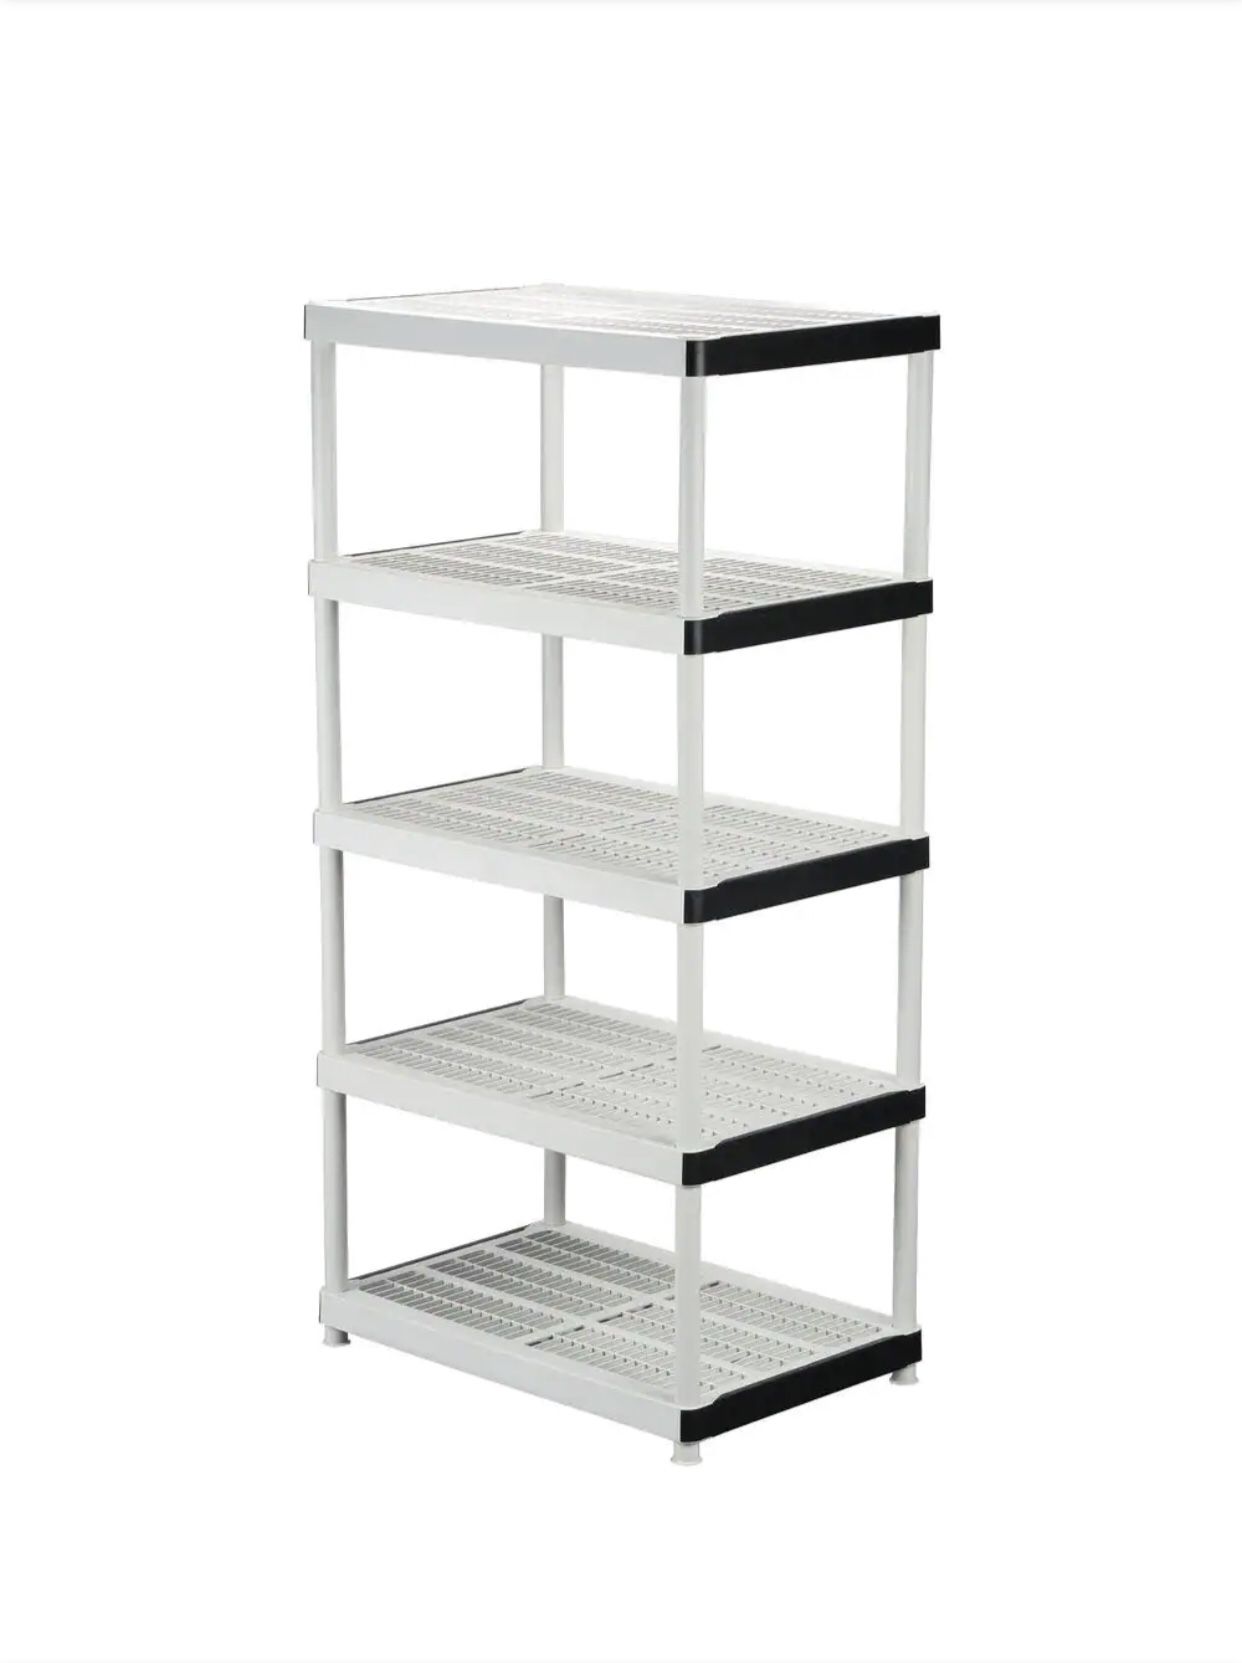 3 Sets of HDX 5-Tier Plastic Garage Storage Shelving Unit in Gray (36 in. W x 72 in. H x 24 in. D)